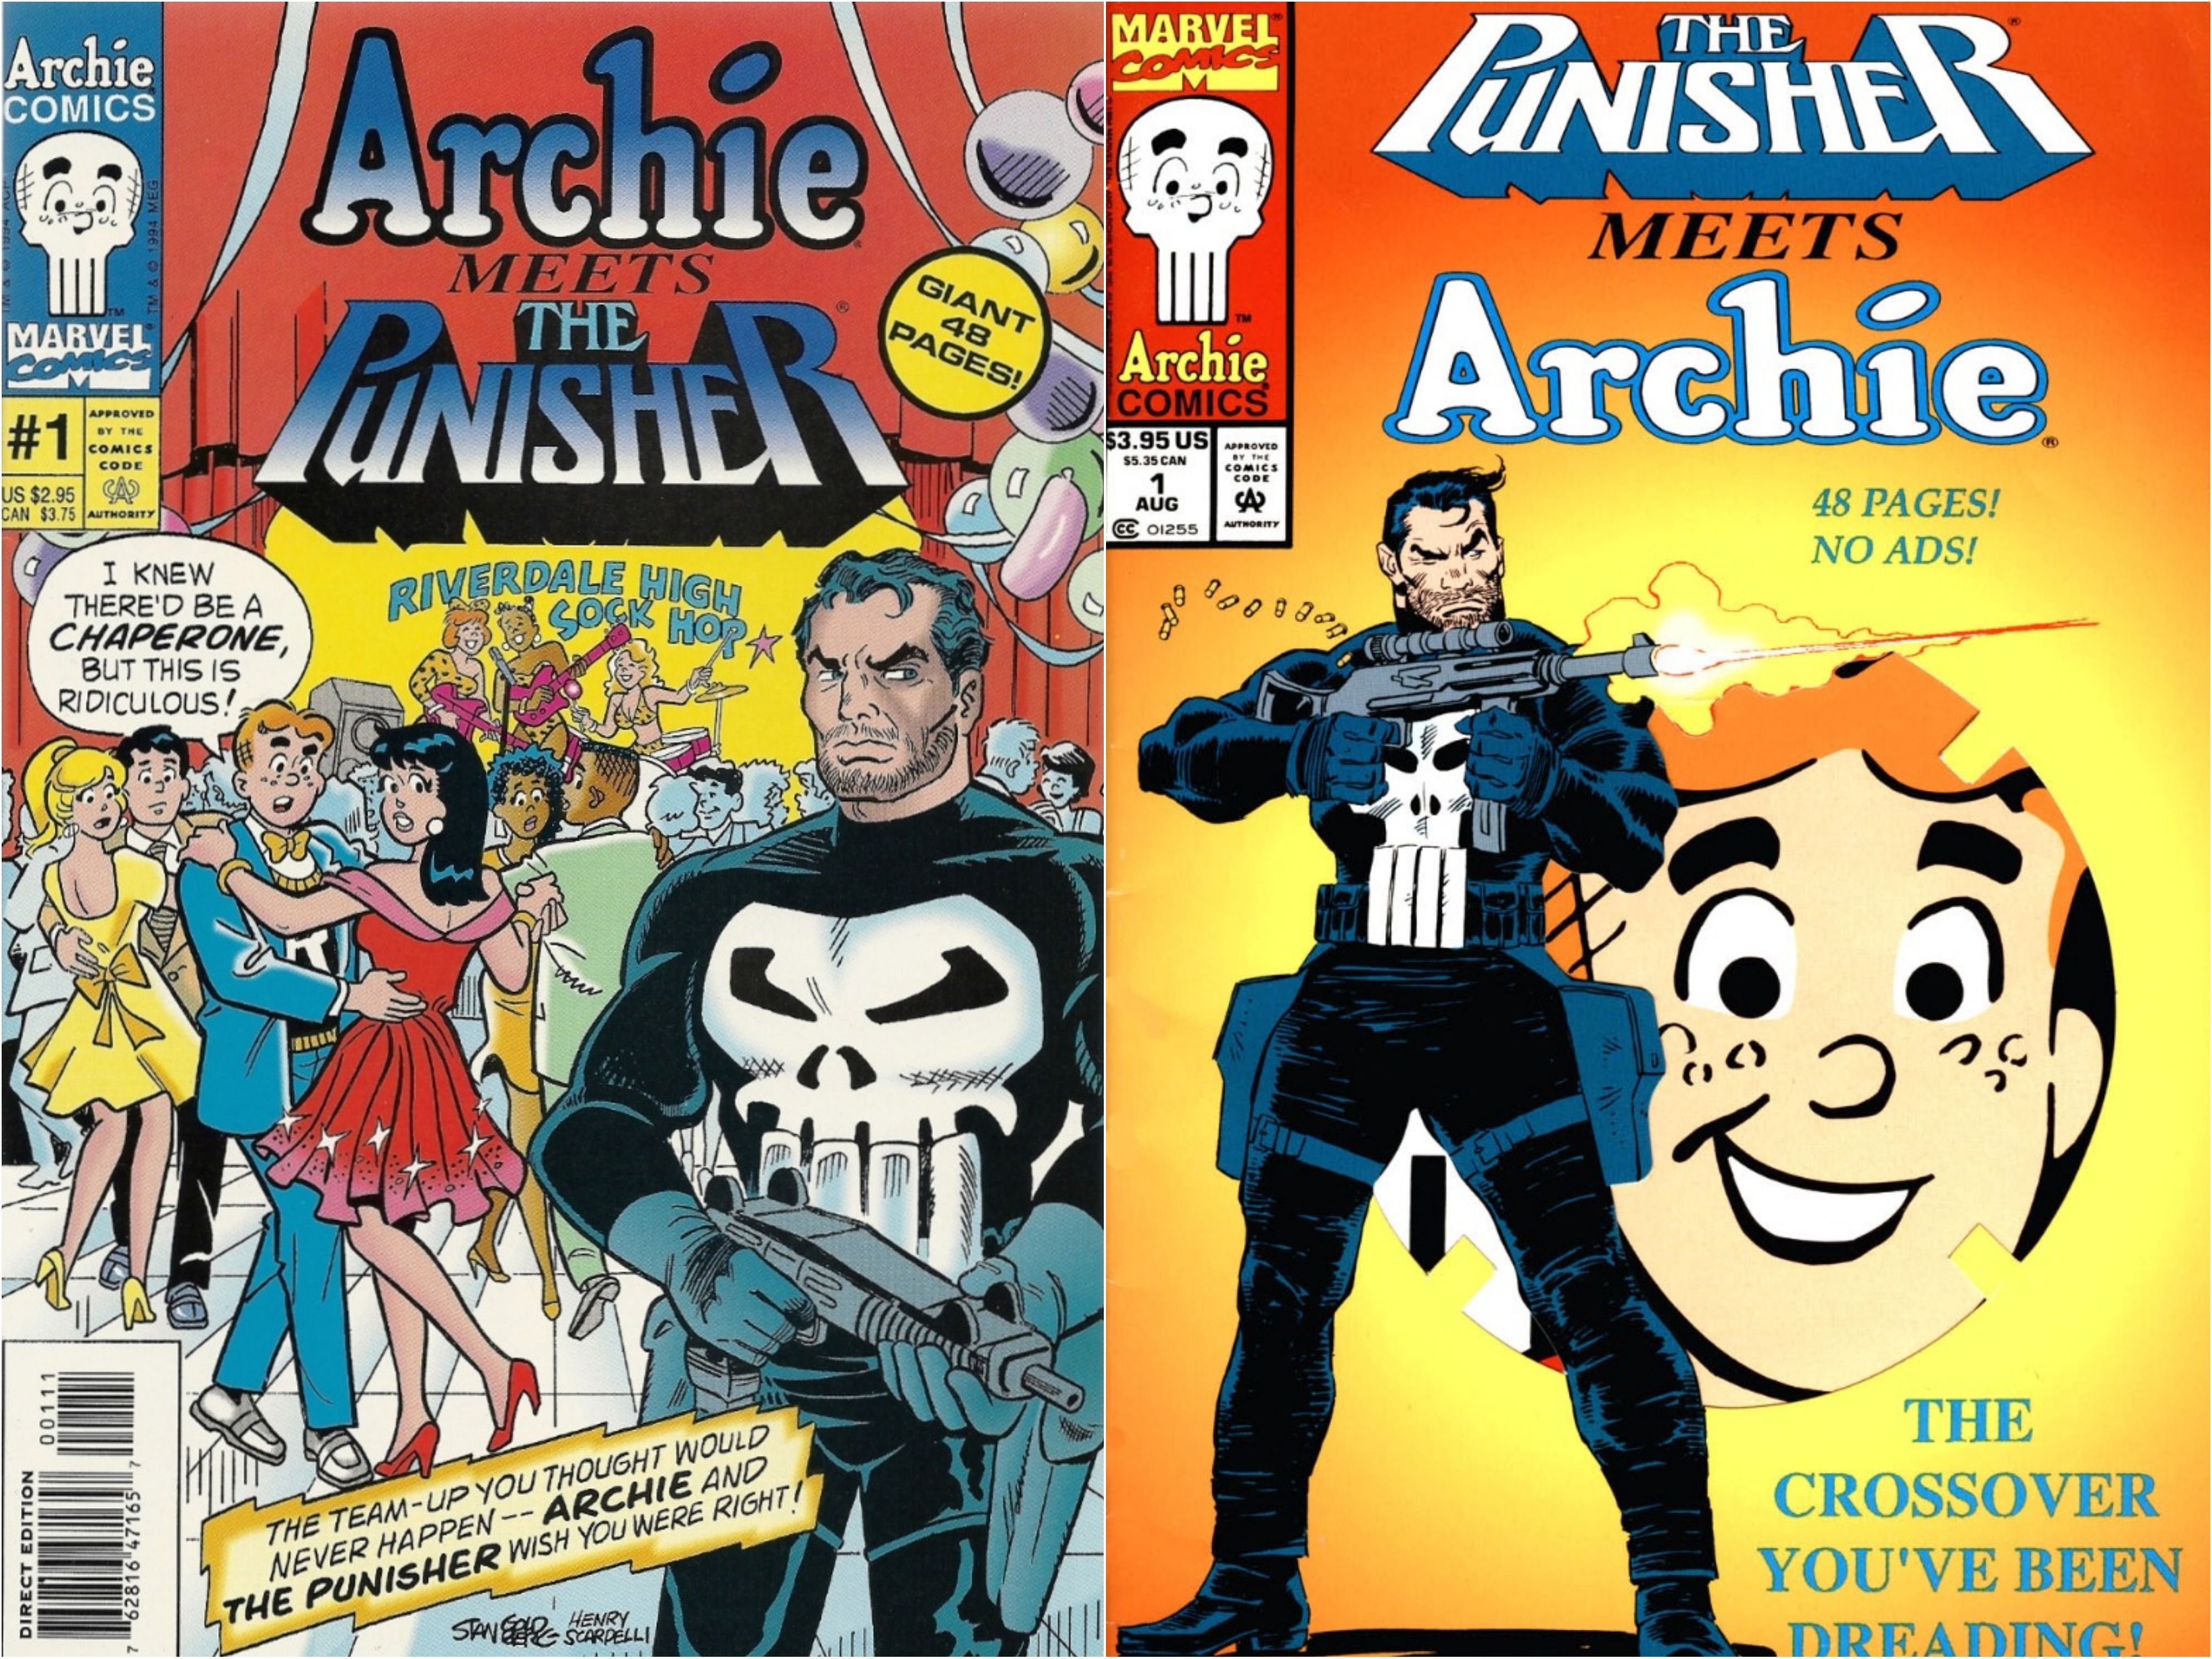 The Punisher Meets Archie Covers